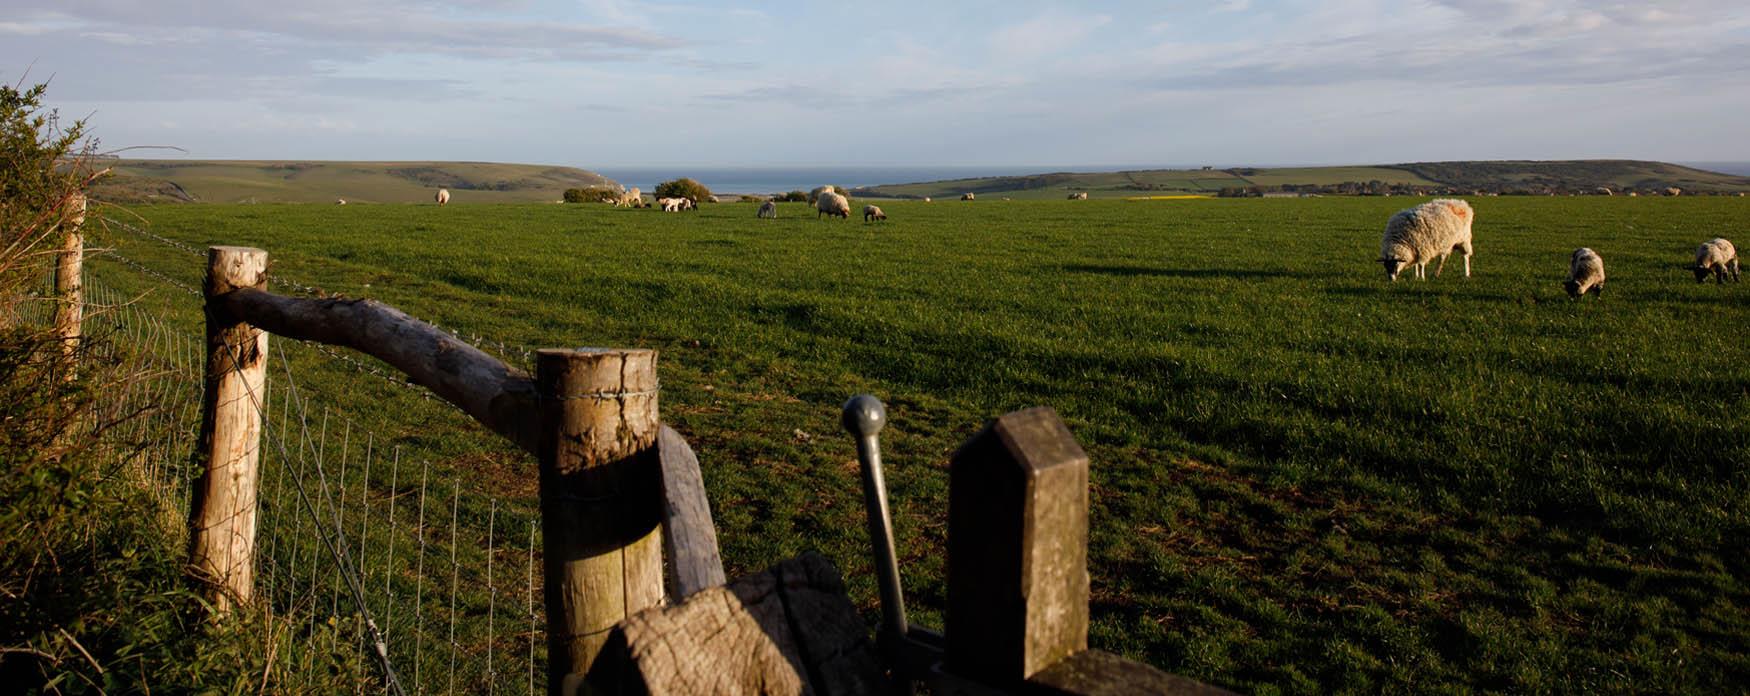 Alfriston field with a wooden fence near the front of the image. In the background there are sheep, most of them are far away. In the background, there are rolling hills on either side and just visible in middle is the ocean.